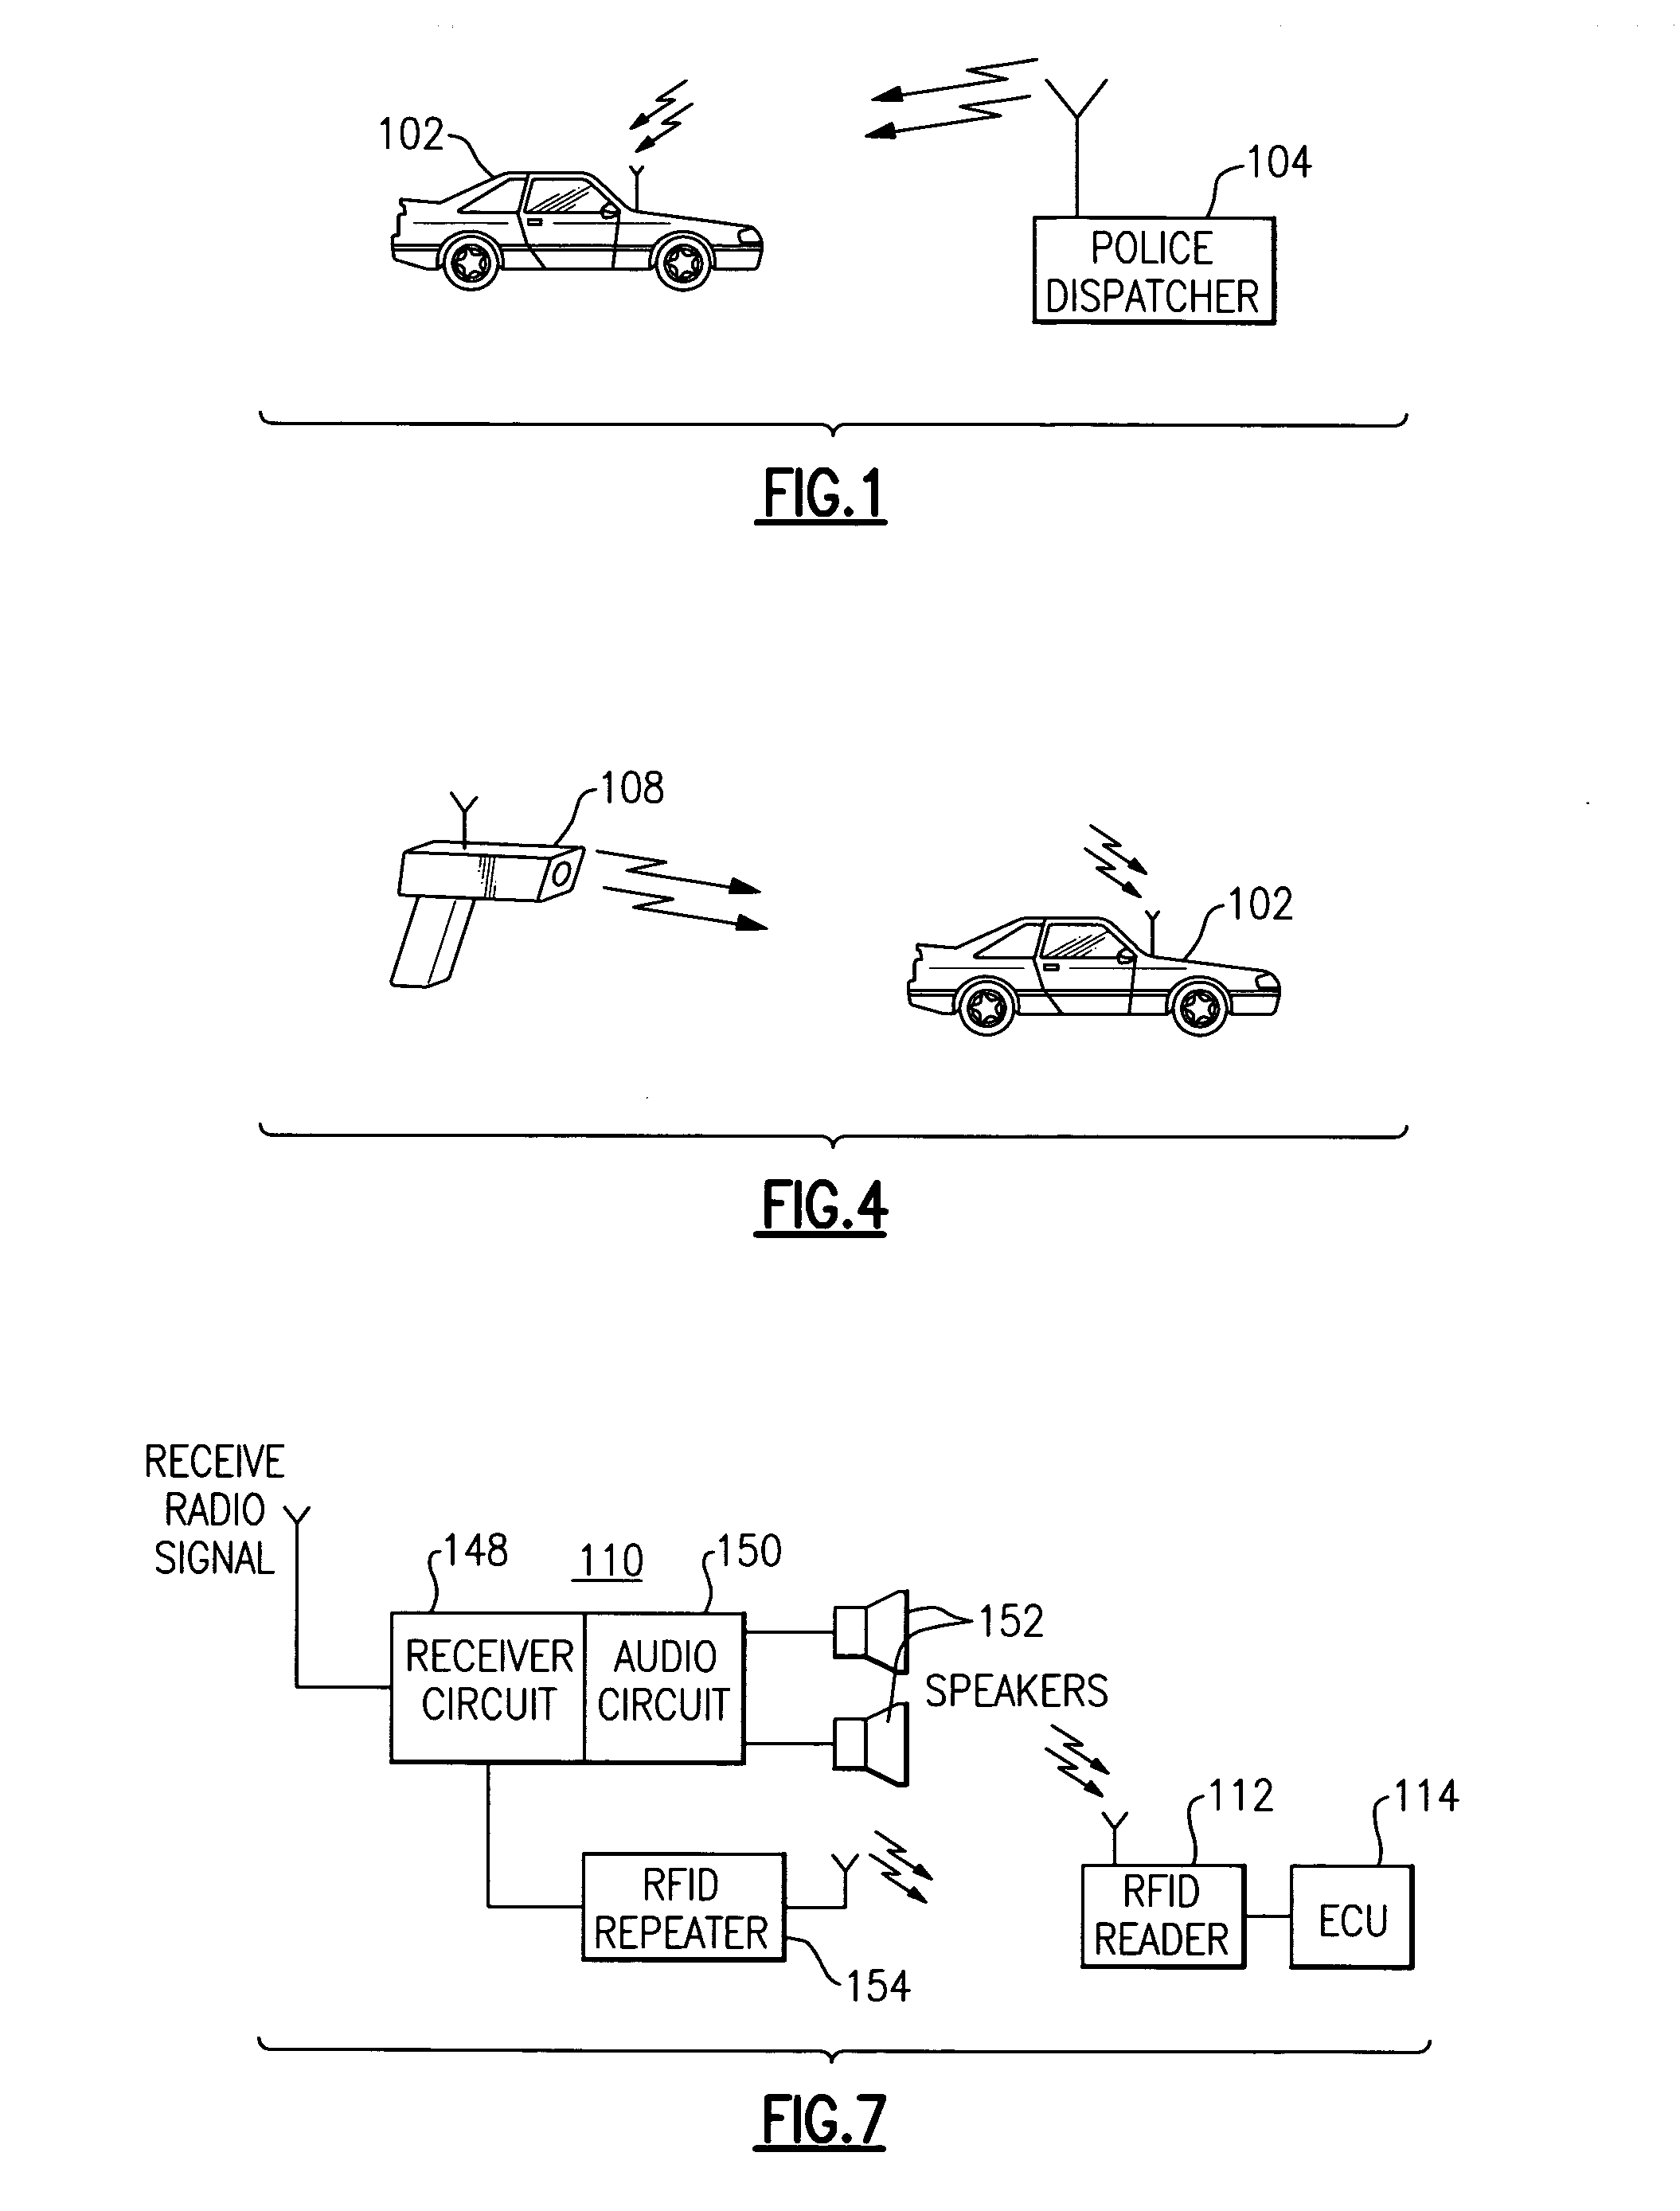 Anti-carjacking apparatus, systems, and methods for hi-speed pursuit avoidance and occupant safety